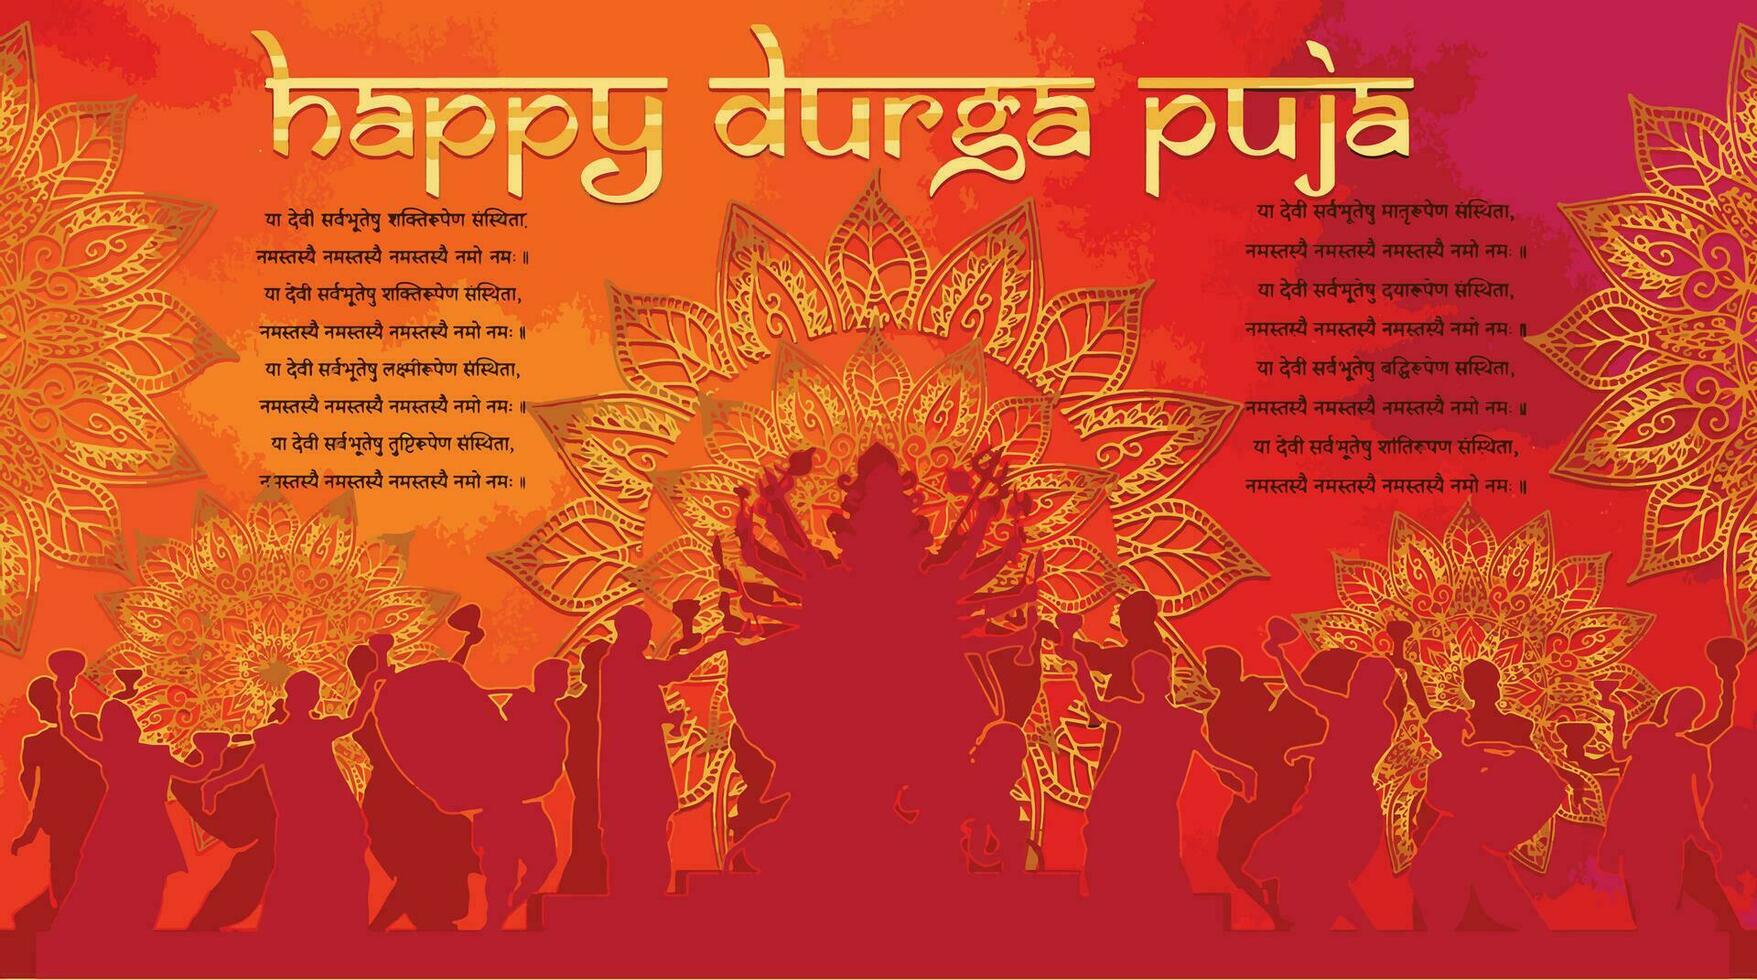 Goddess Maa Durga F in Happy Durga Puja, Dussehra, and Navratri Celebration Concept for Web Banner, Poster, Social Media Post, and Flyer Advertising vector